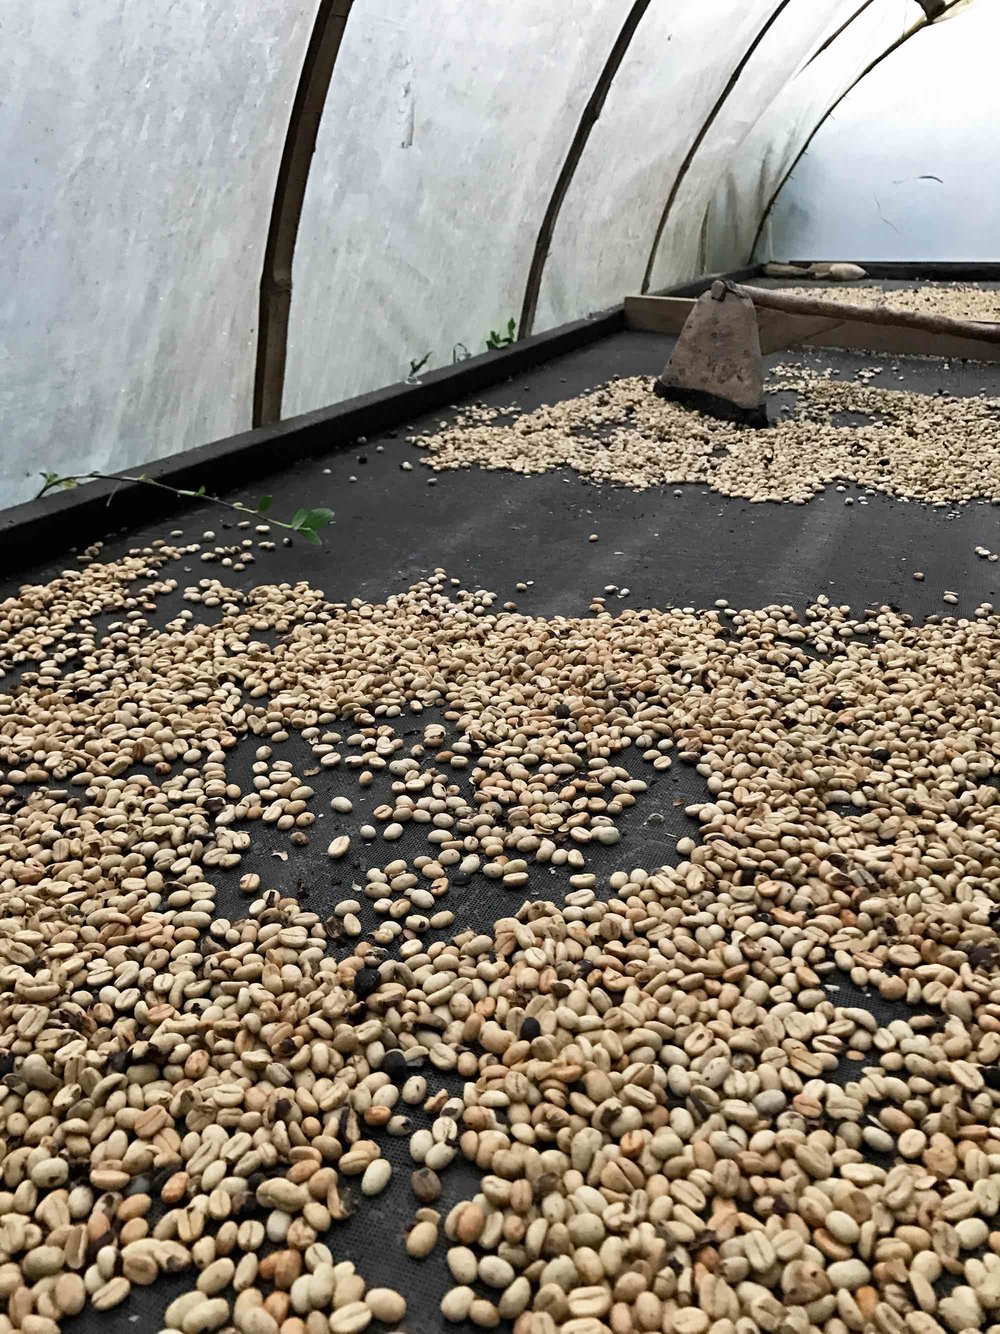 Drying coffee in the coffee region of Colombia